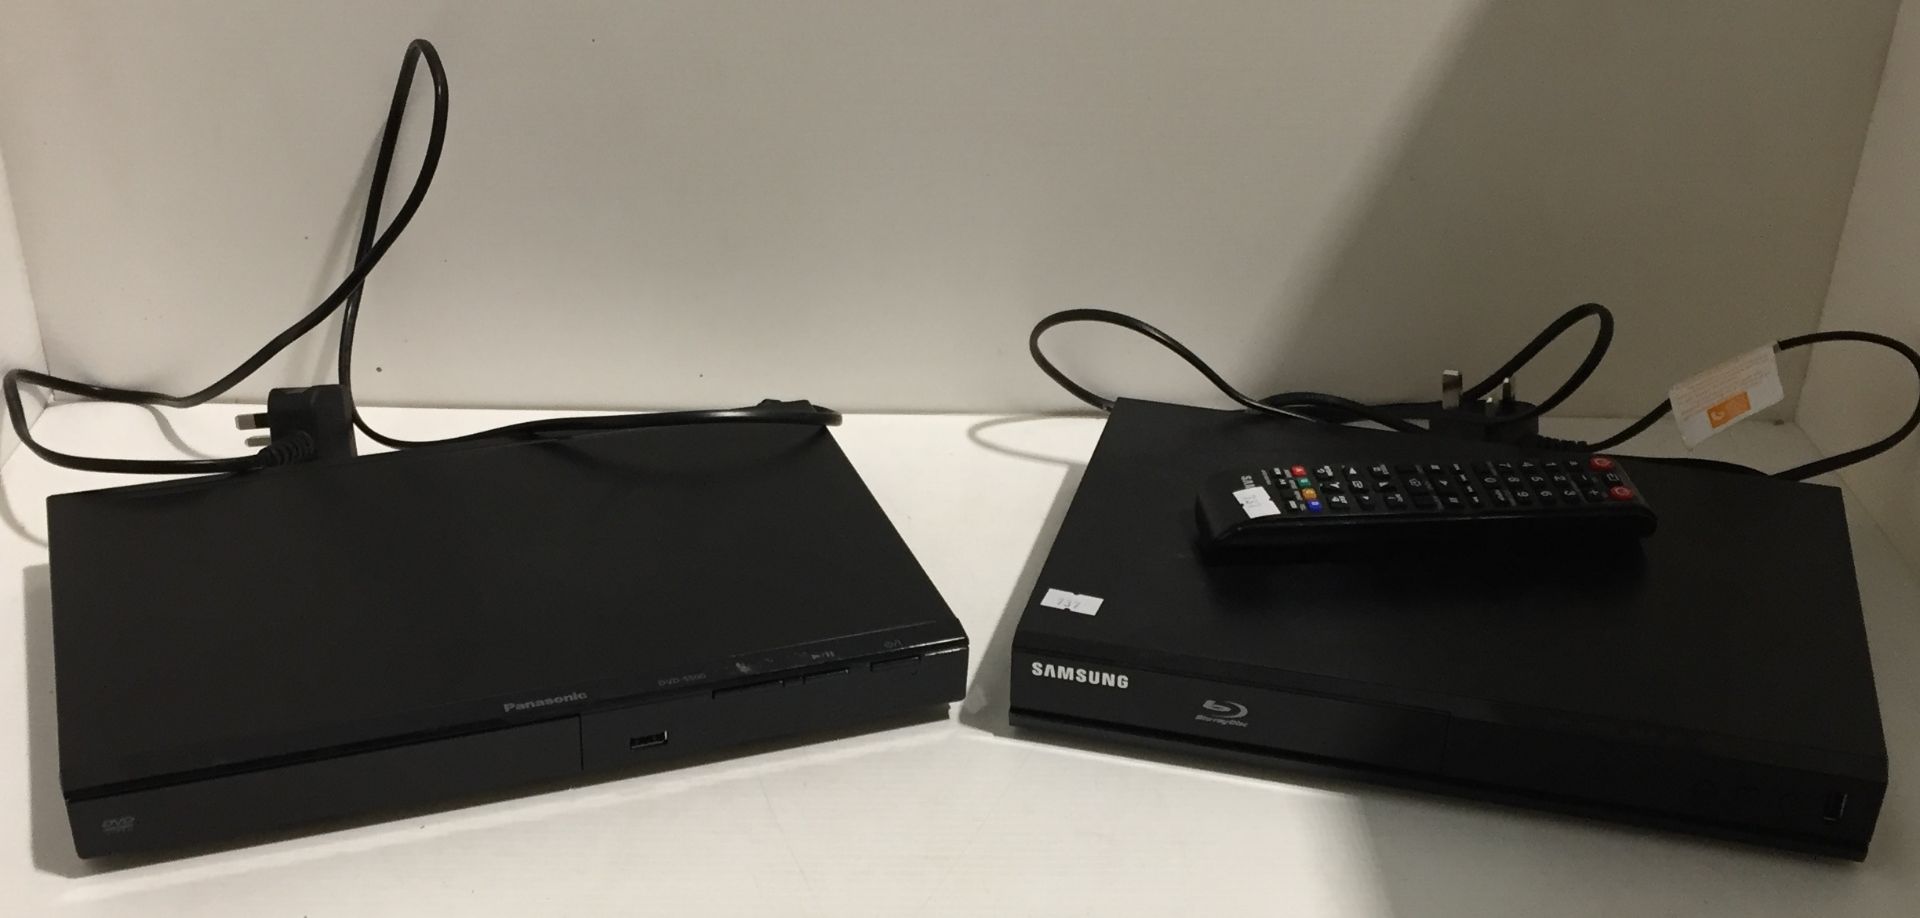 Samsung Blu Ray Disc Player BD-J4500R with remote control and Panasonic DVD - S500 - no remote